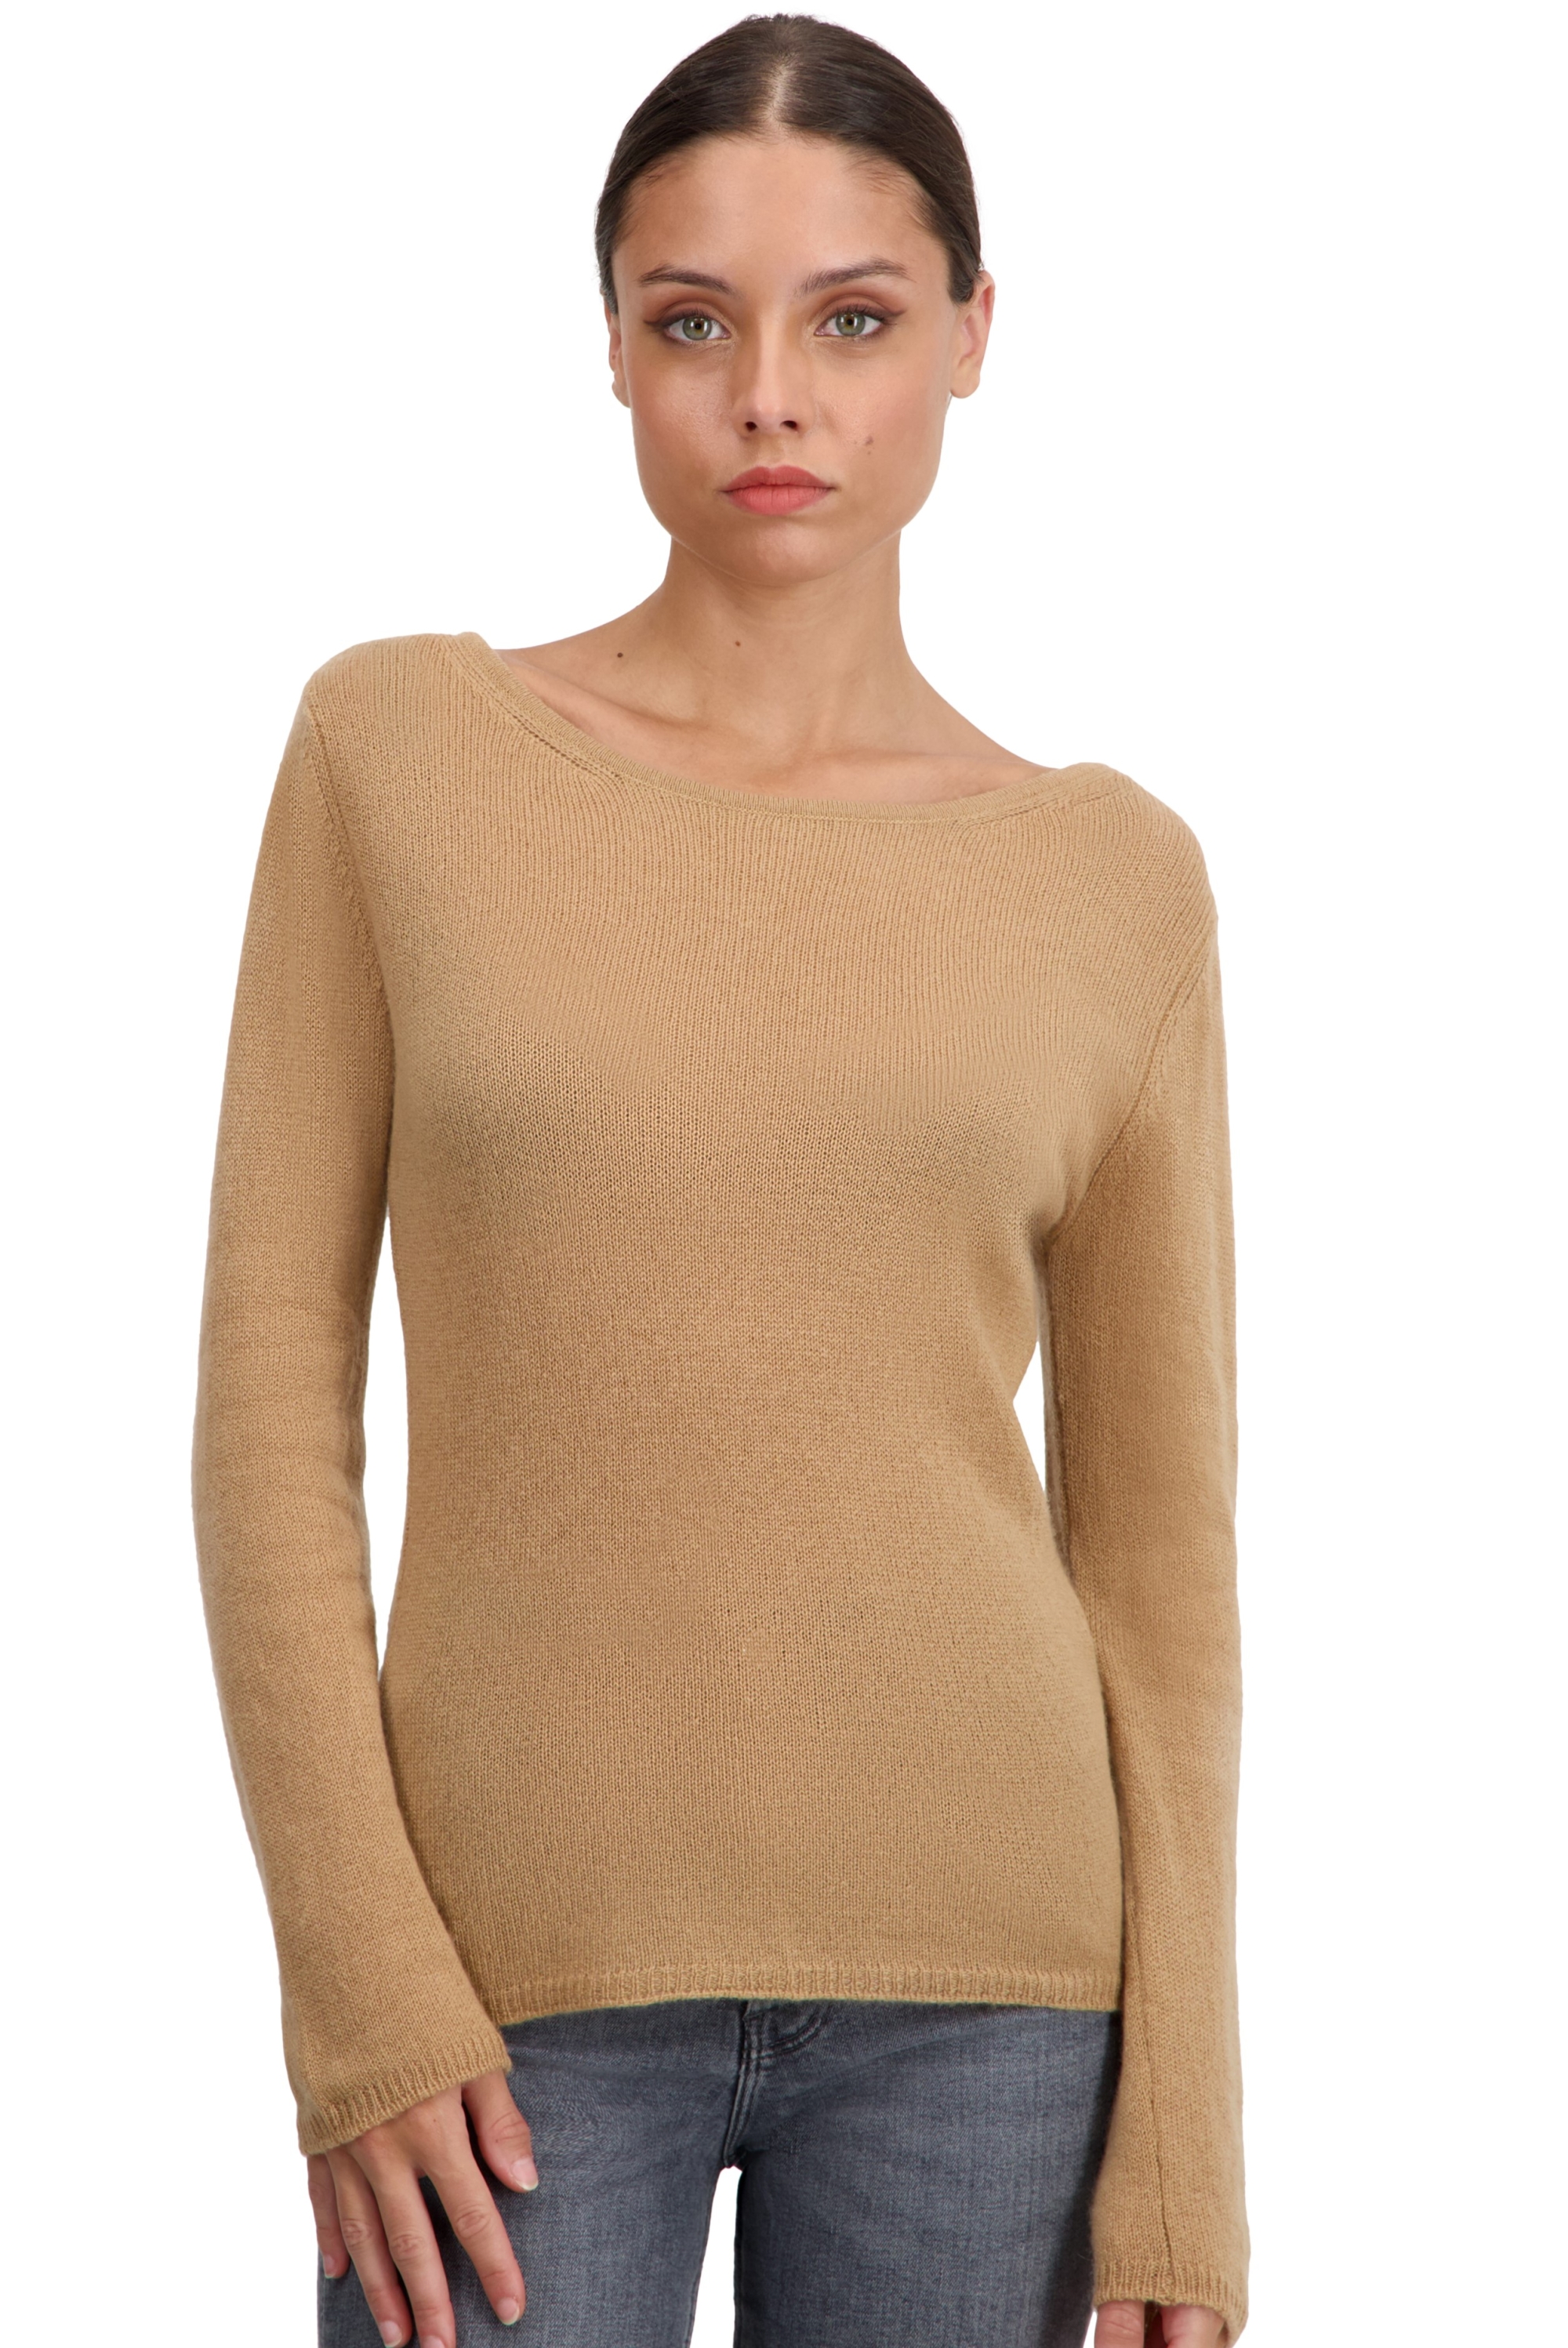 Cashmere ladies basic sweaters at low prices caleen camel l